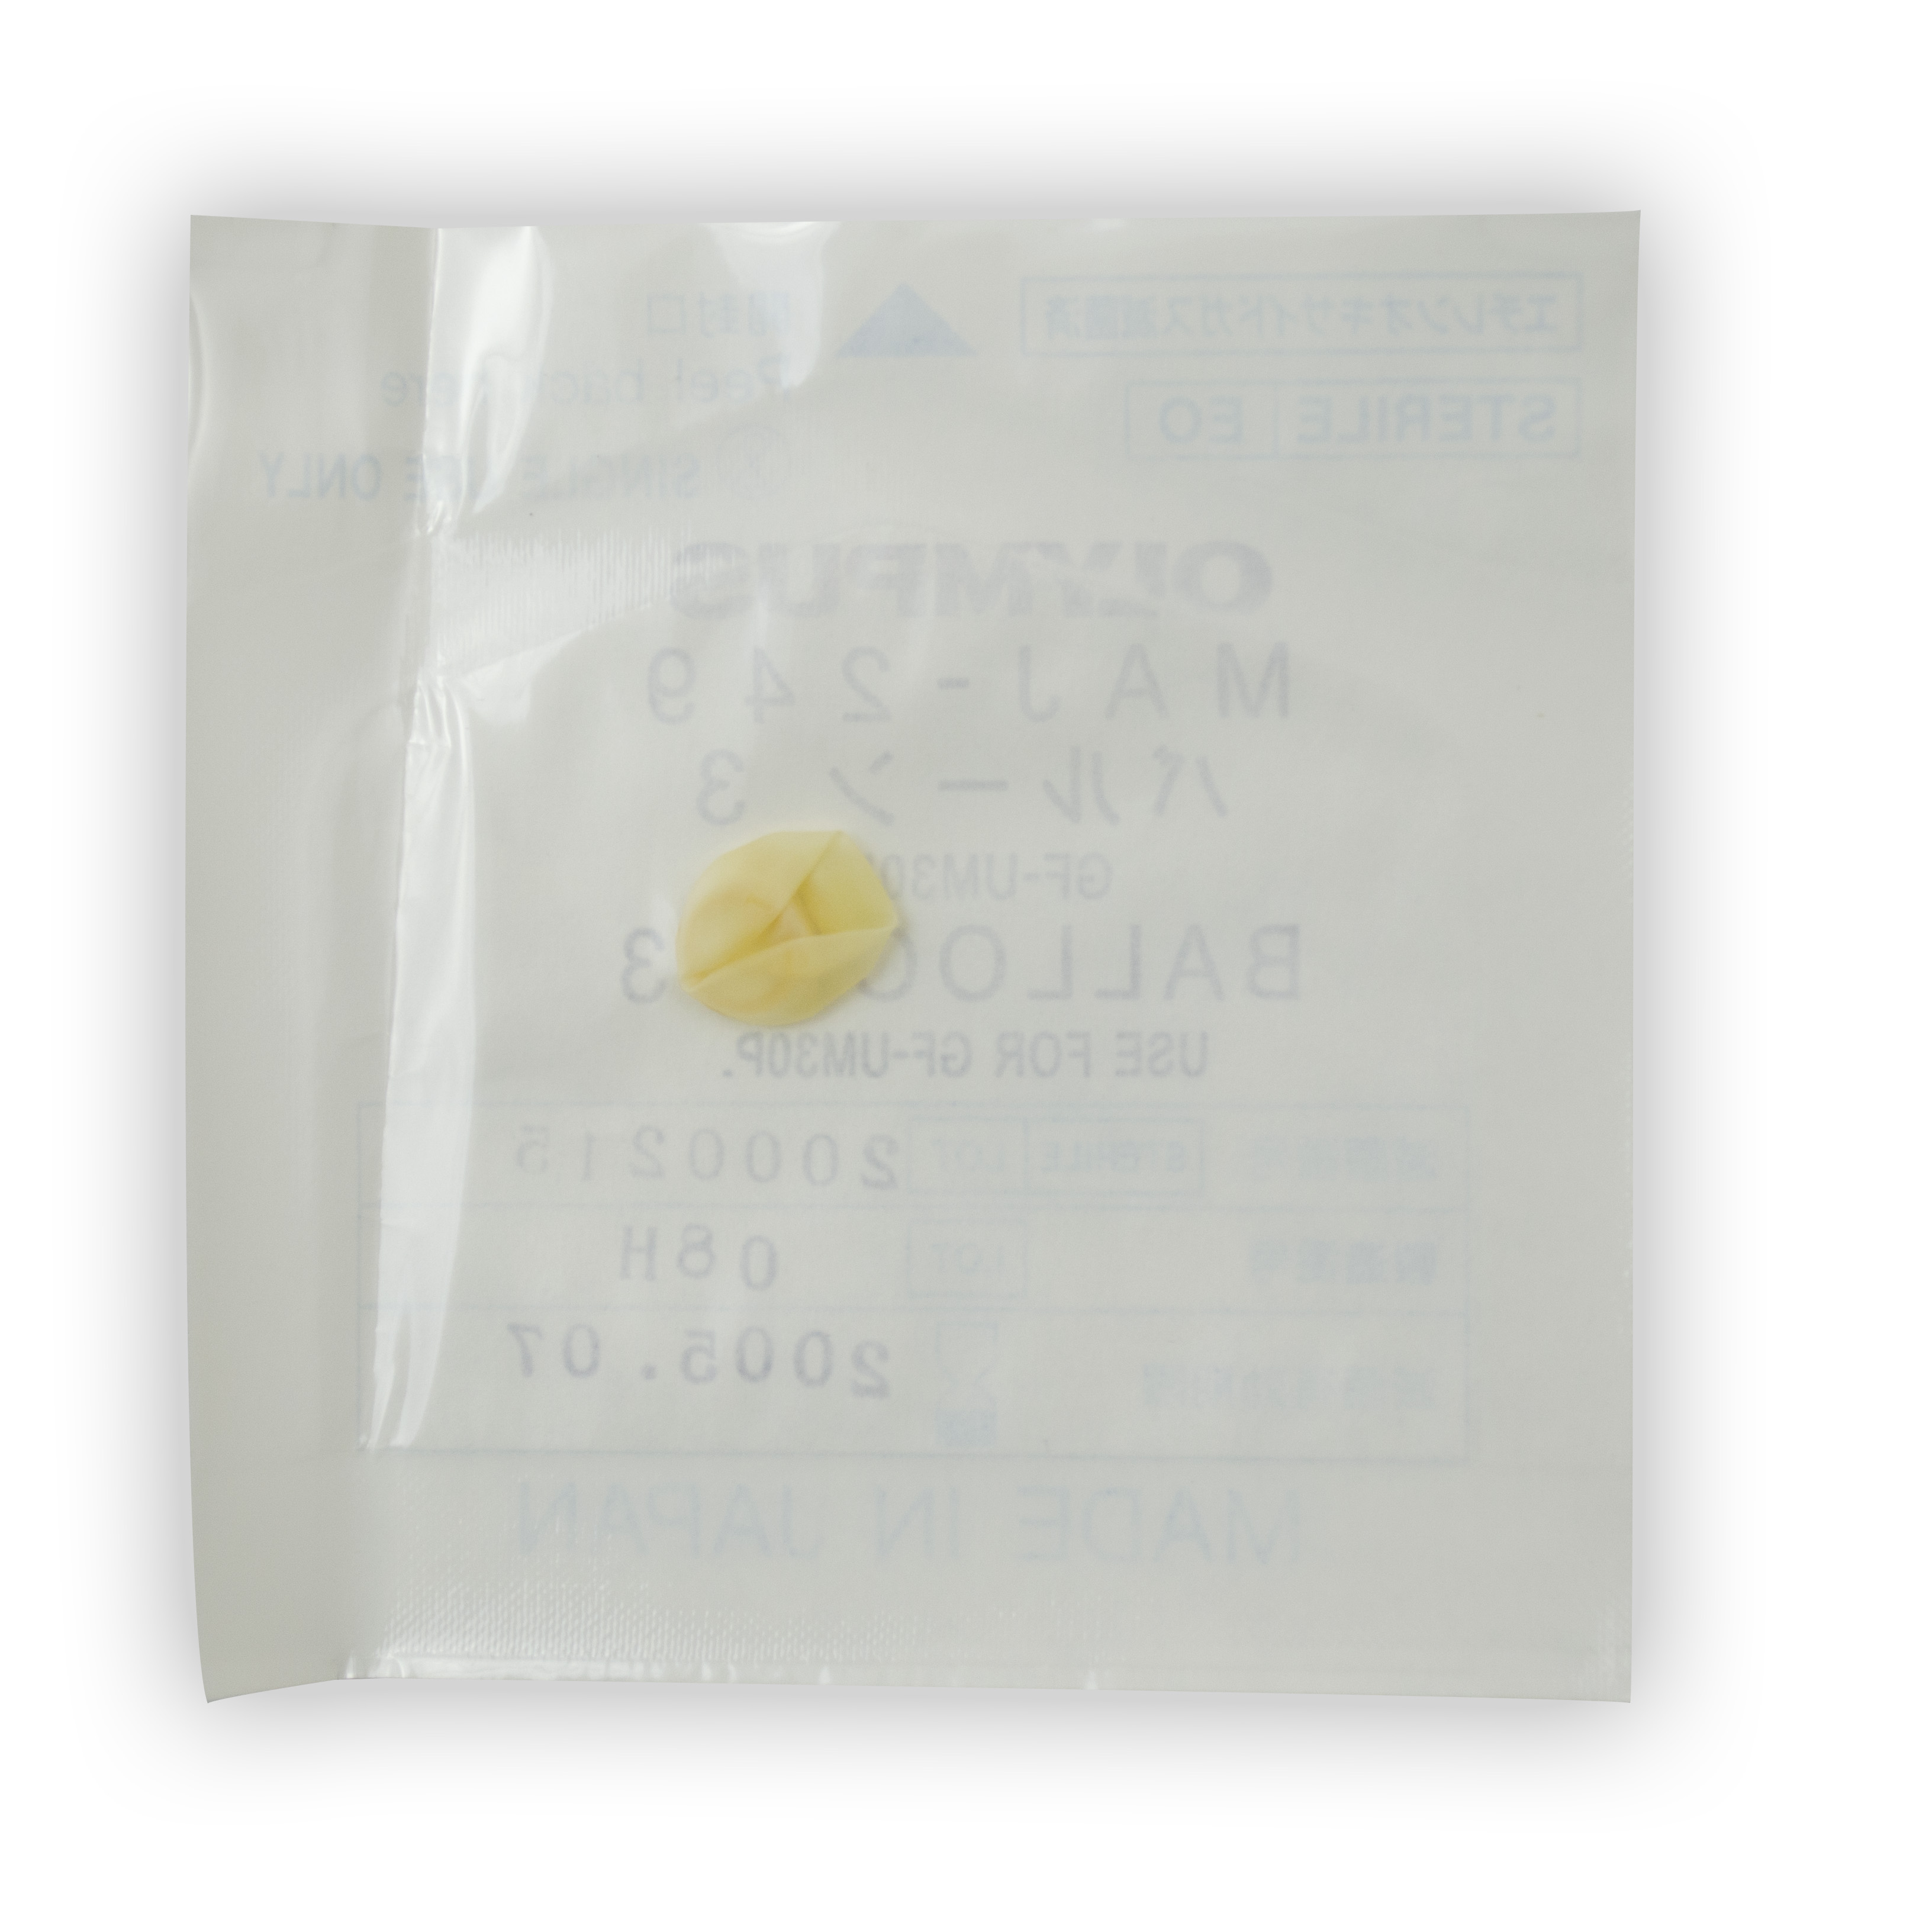 [Out-of-Date] Olympus Disposable Accessory (Each) - MAJ-249